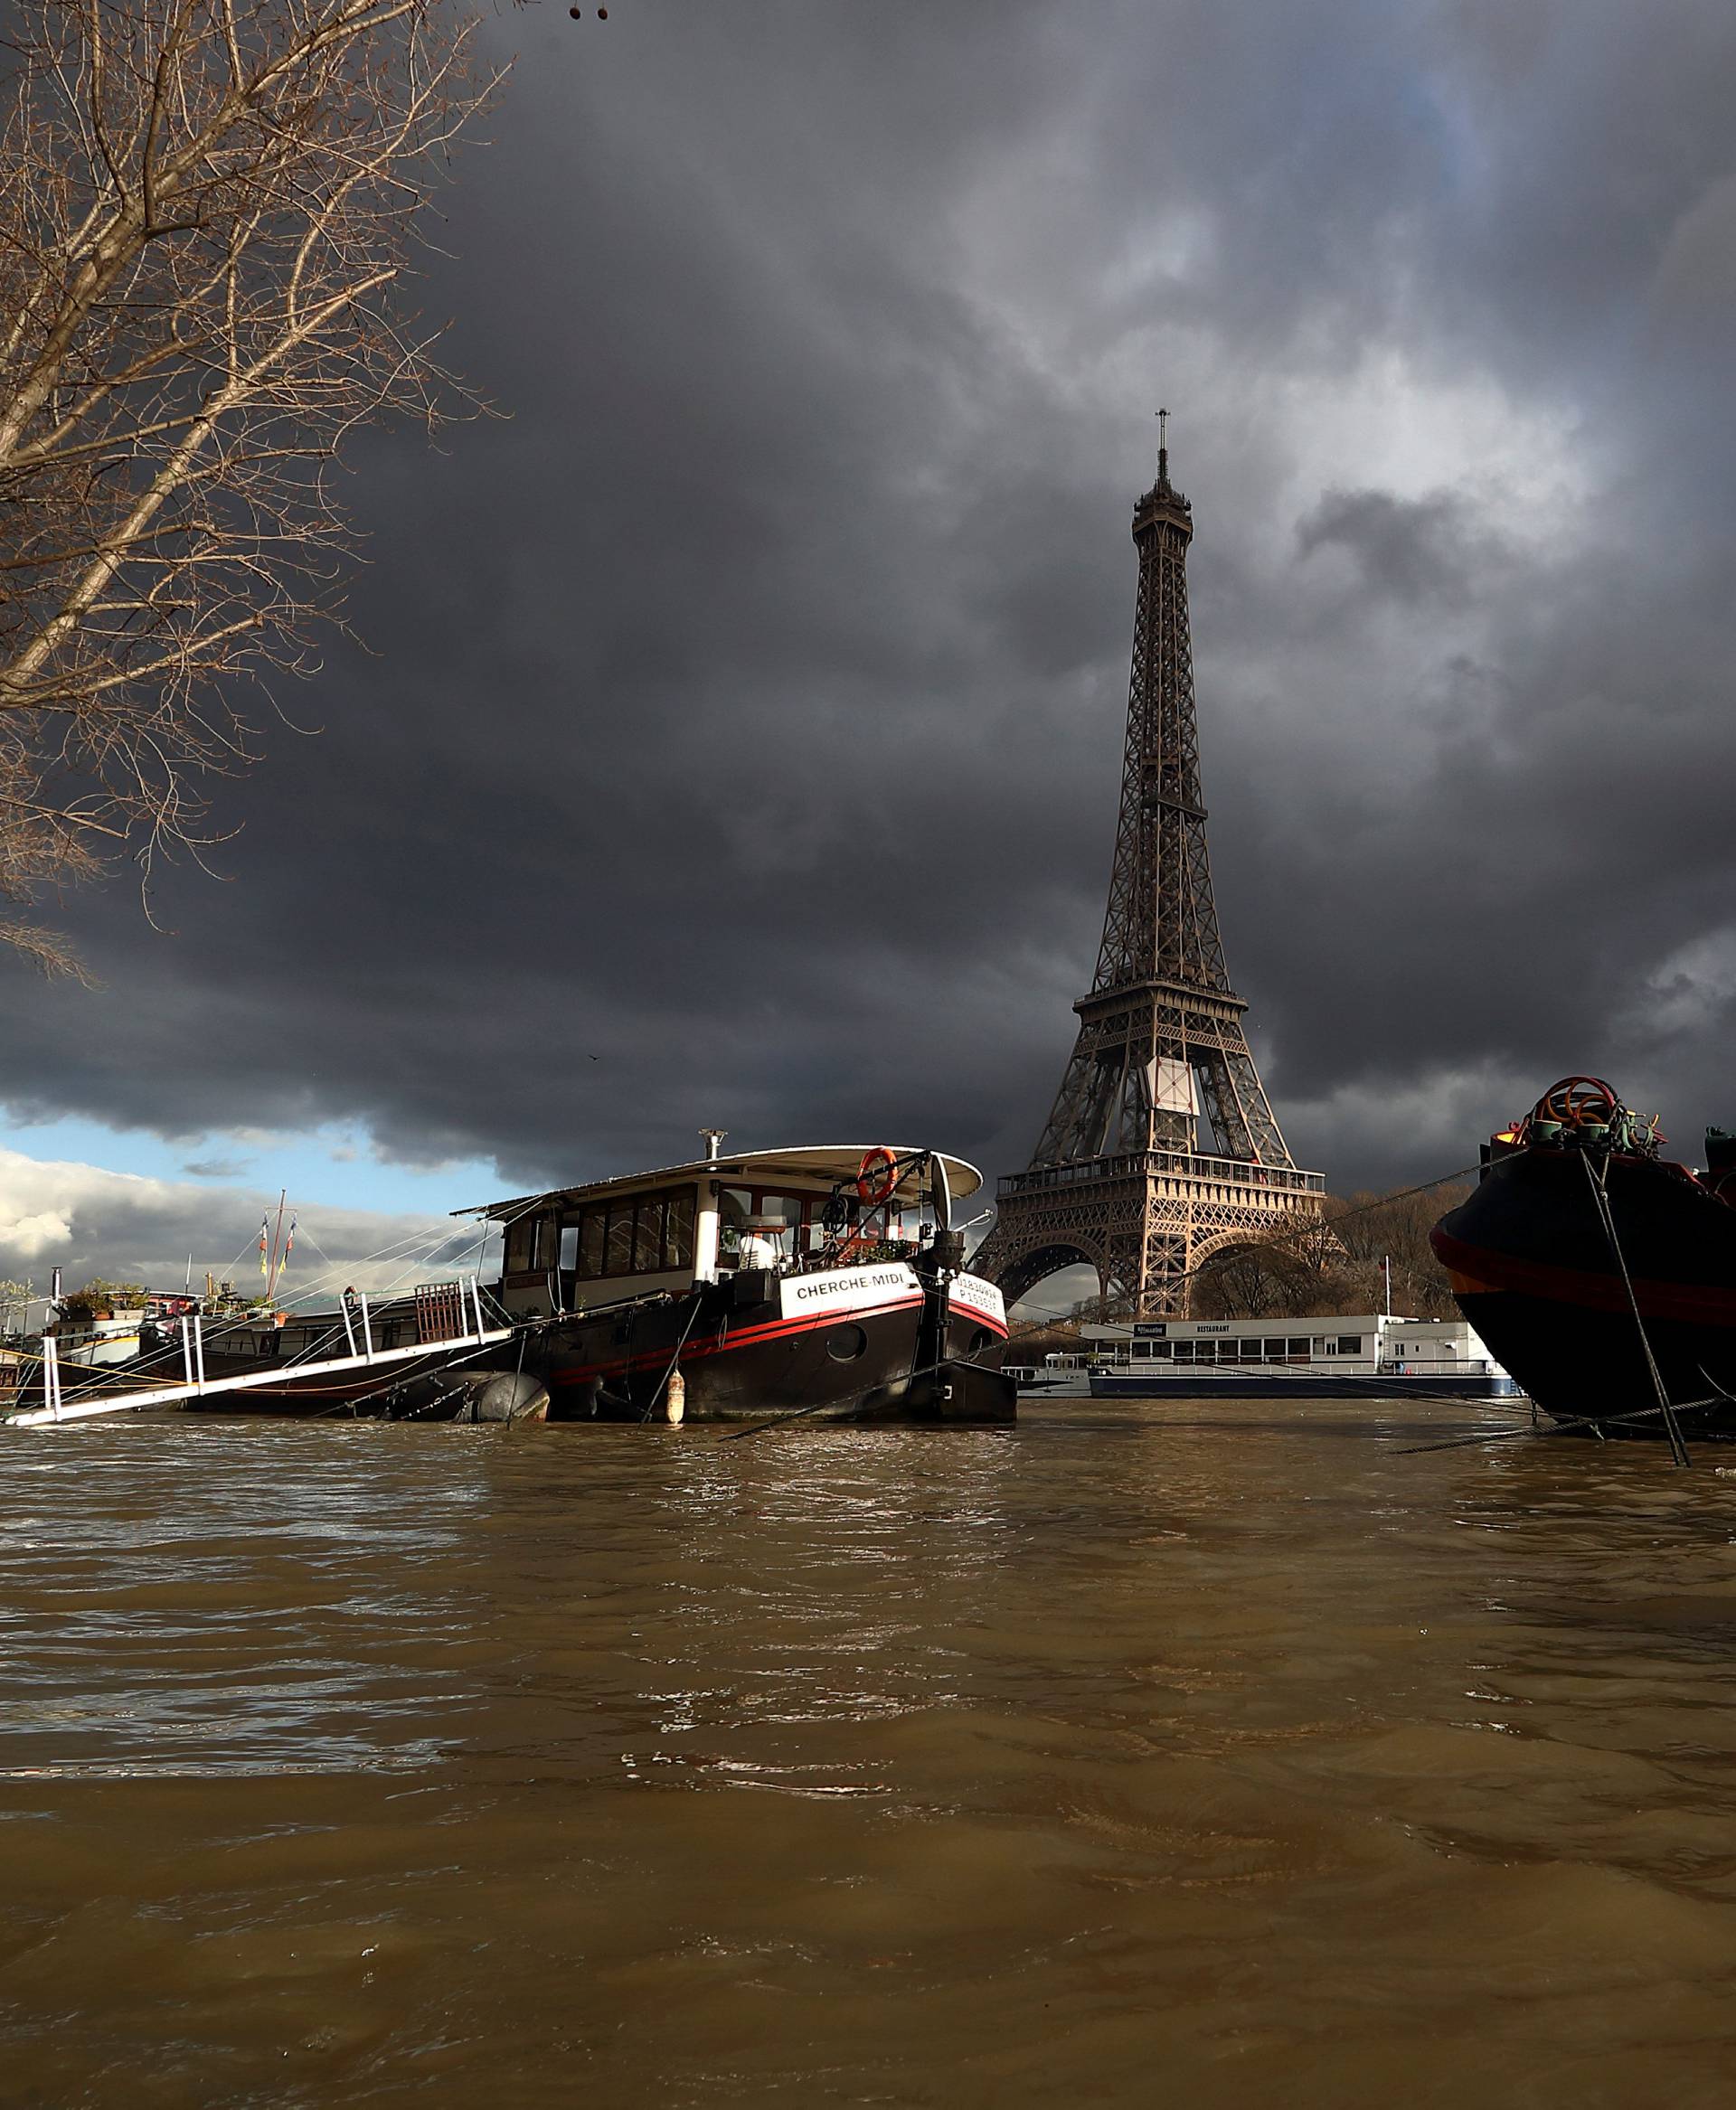 A view shows peniche houseboats moored and the Eiffel Tower along the flooded banks of the River Seine after days of almost non-stop rain caused flooding in the country in Paris